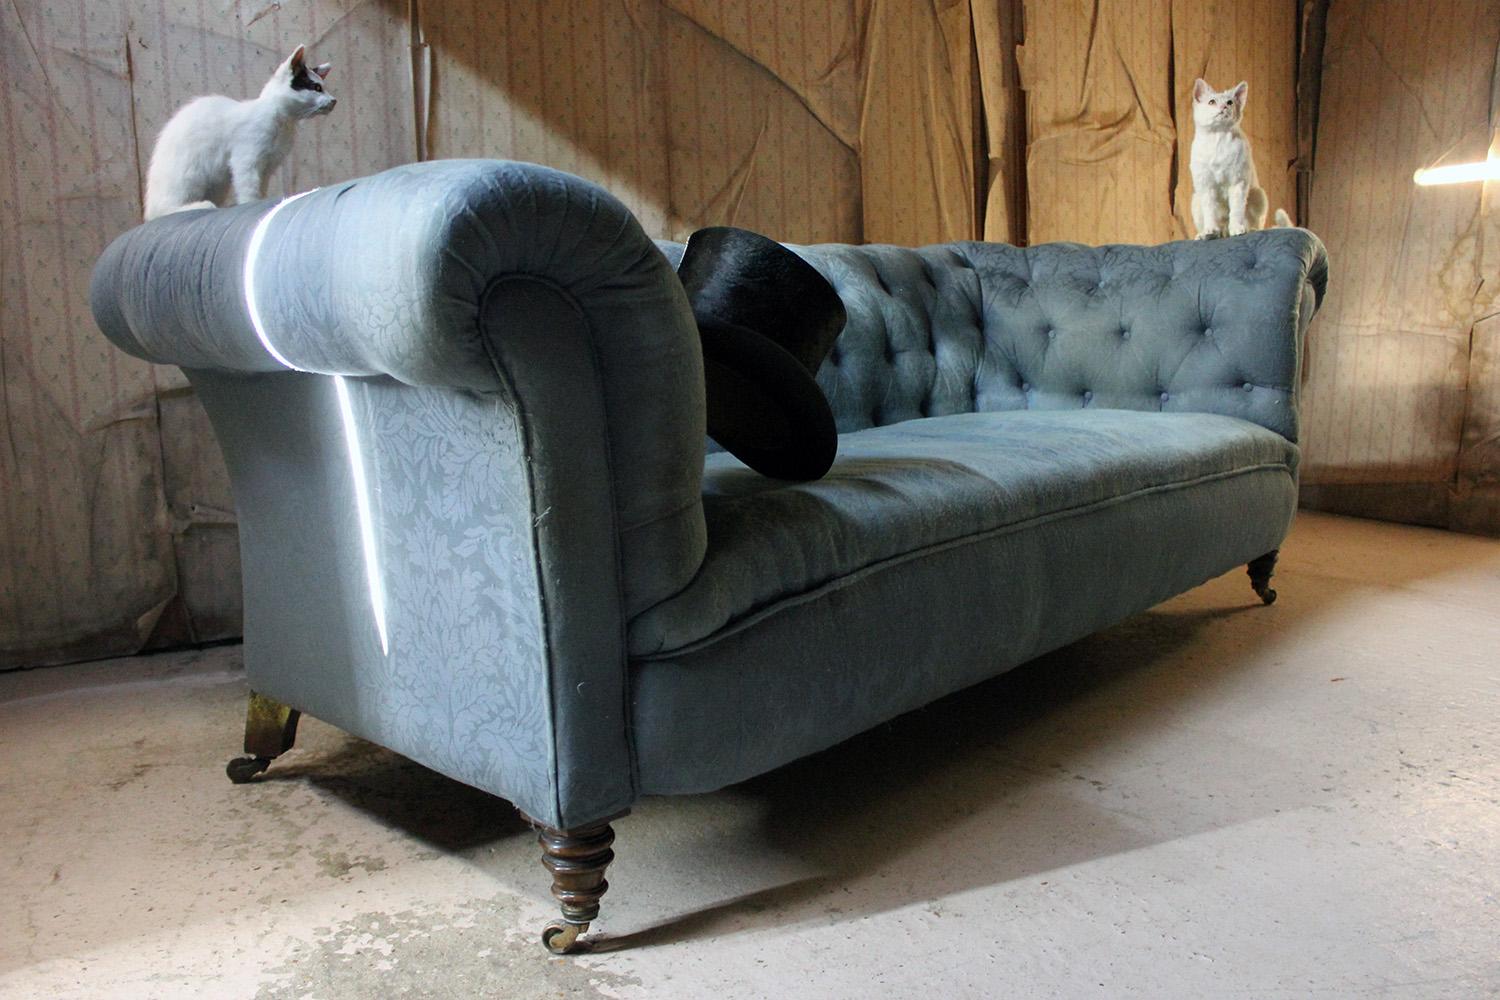 The three-seat country-house quality carcass with sprung seat, the whole being button-backed and upholstered in a peacock blue William Morris type floral fabric with single piping, though tired and dirty it is prime for recovering, the whole sitting